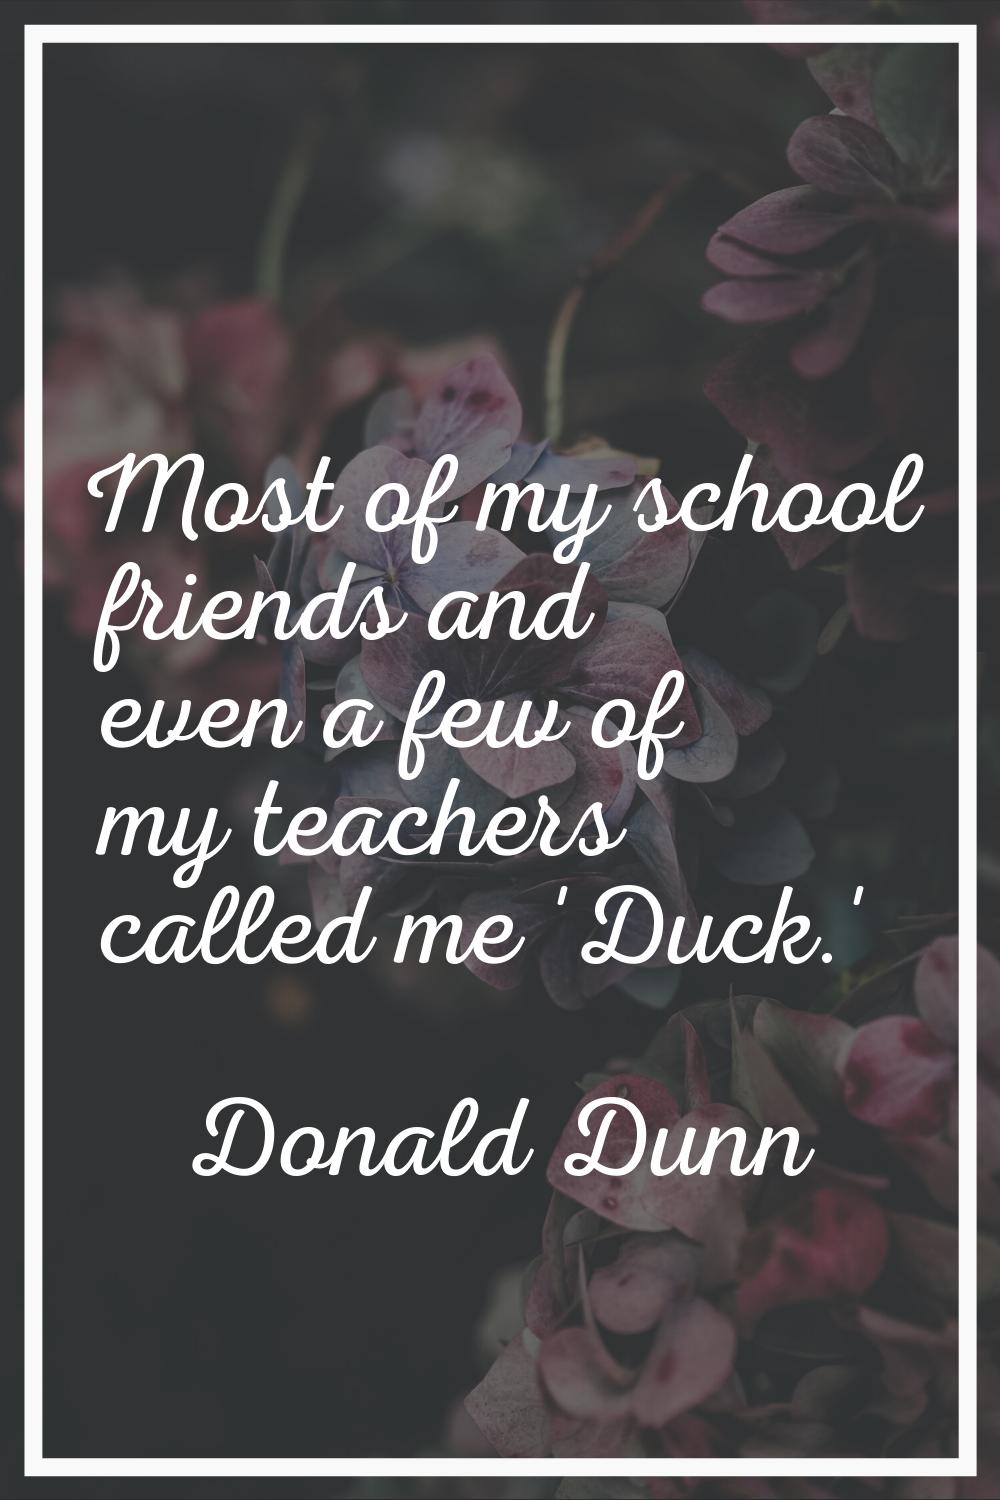 Most of my school friends and even a few of my teachers called me 'Duck.'